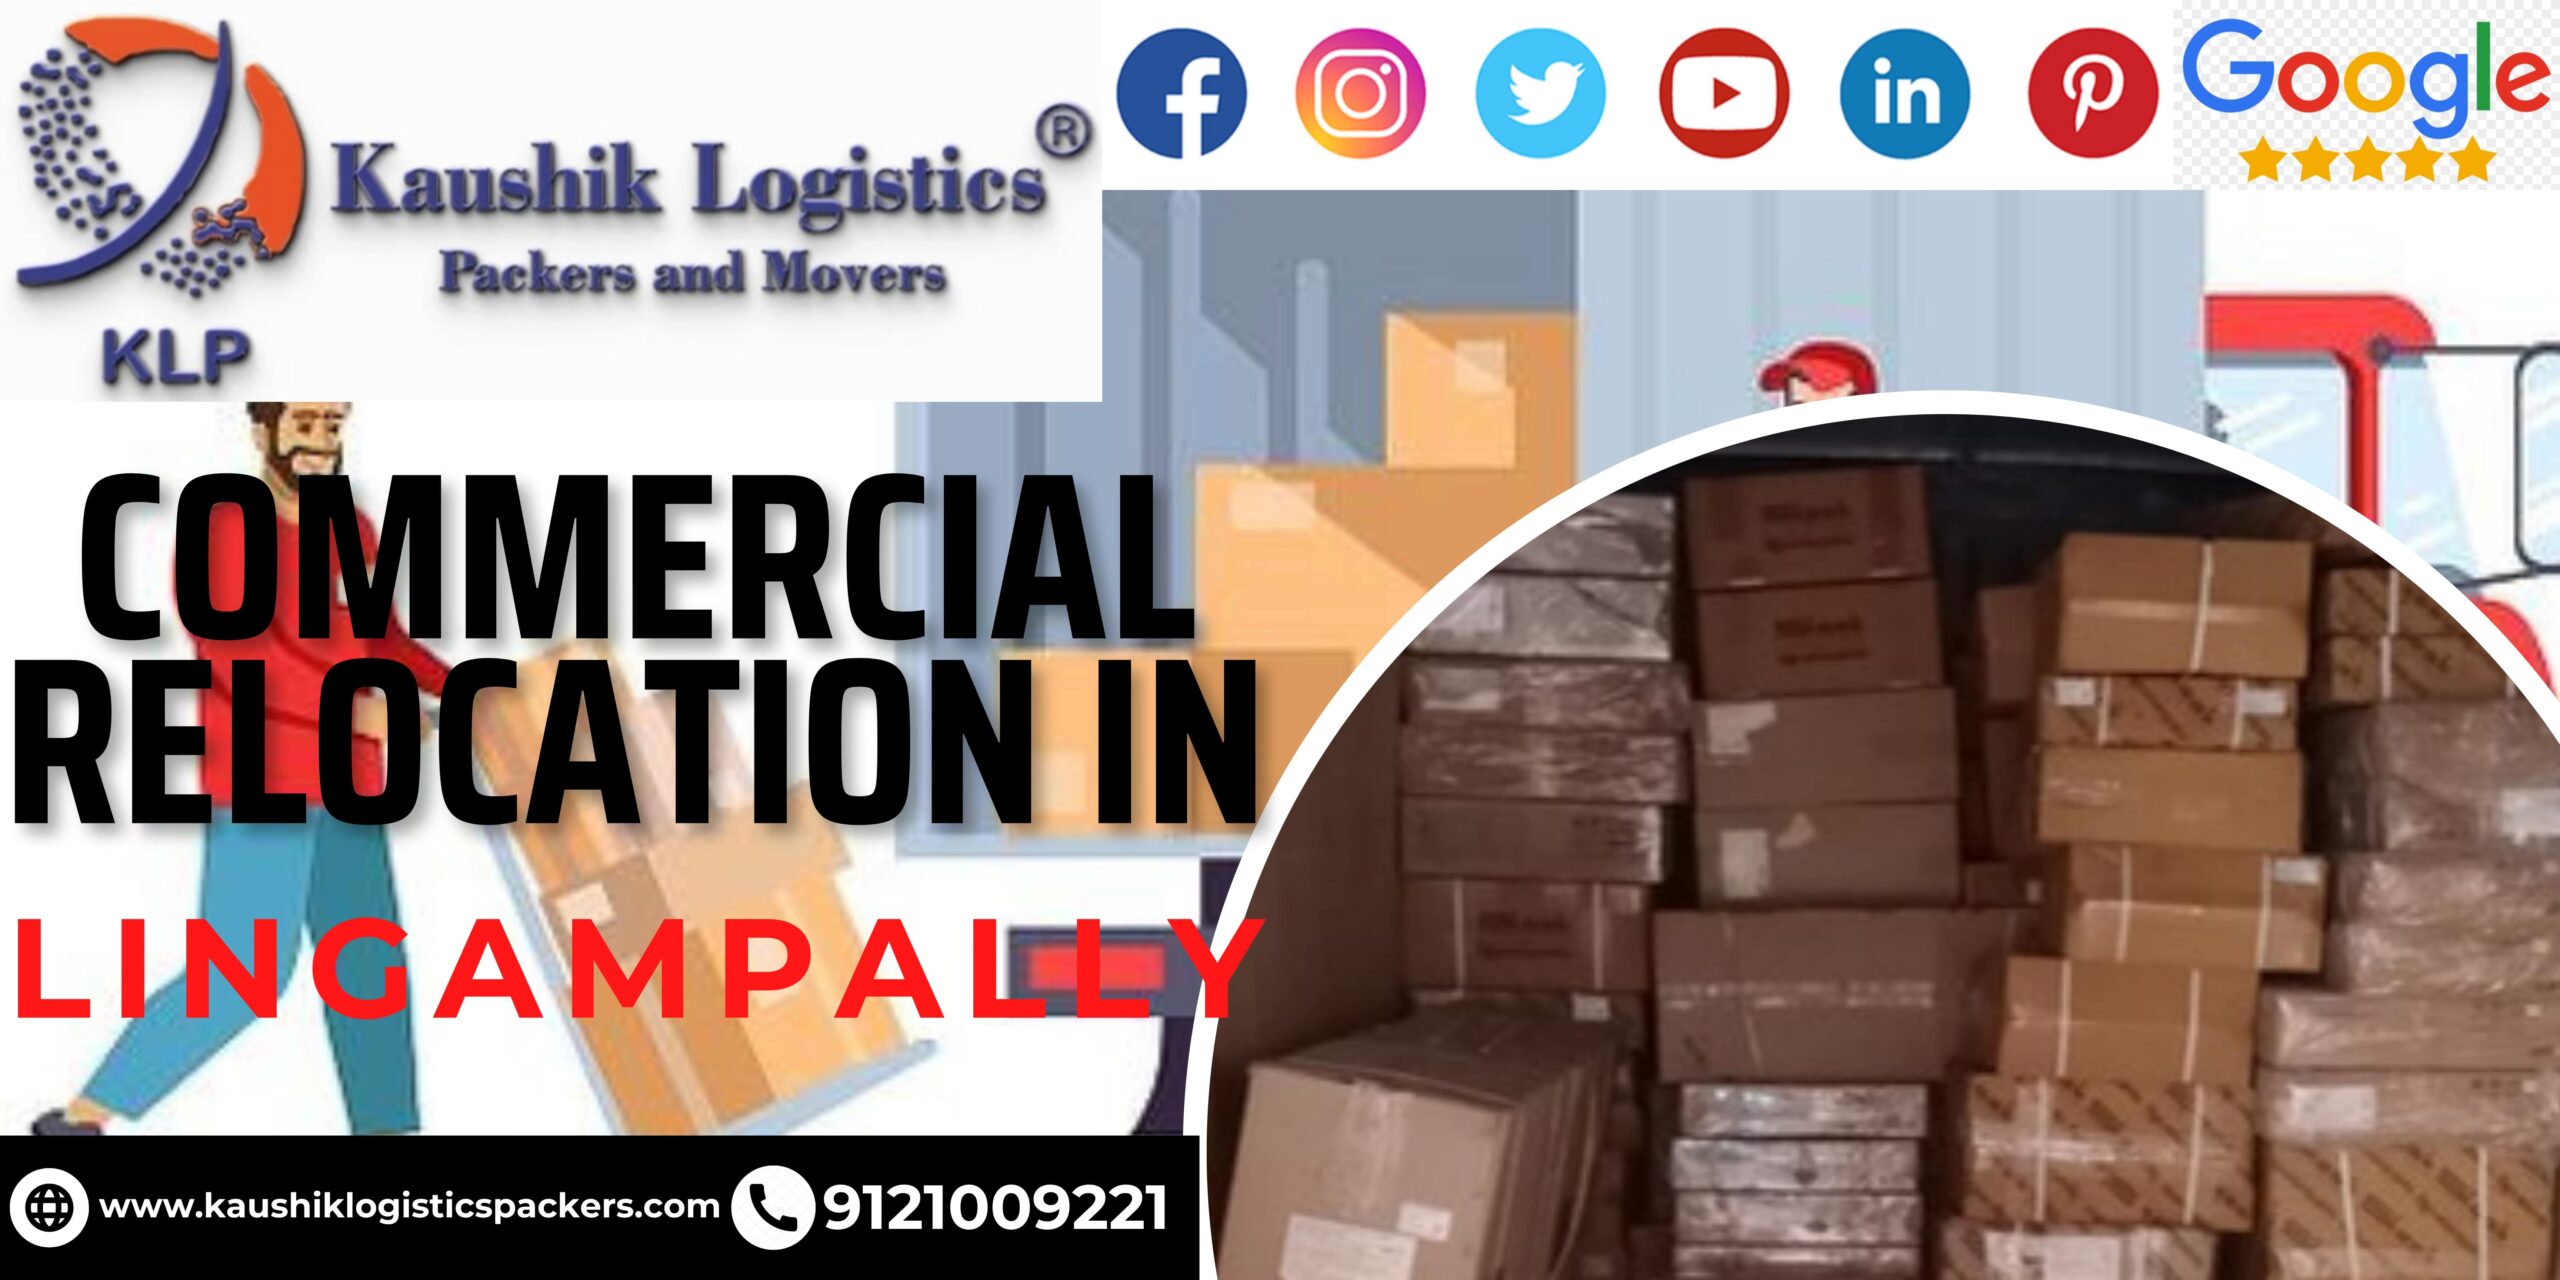 Packers and Movers In Lingampally